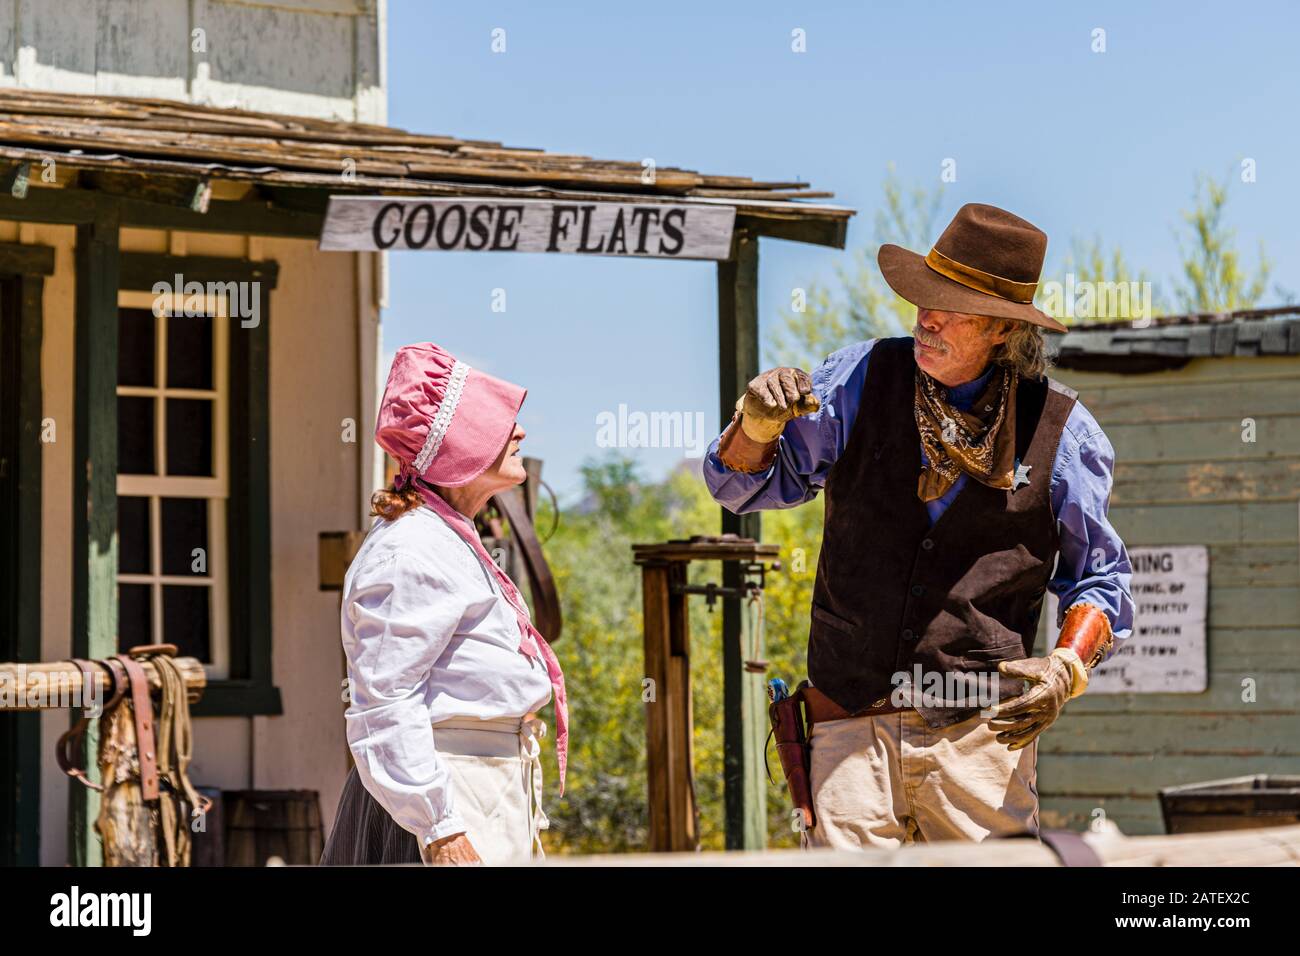 Pioneer Living History Museum: Goose Flats Bank Robbery Stock Photo